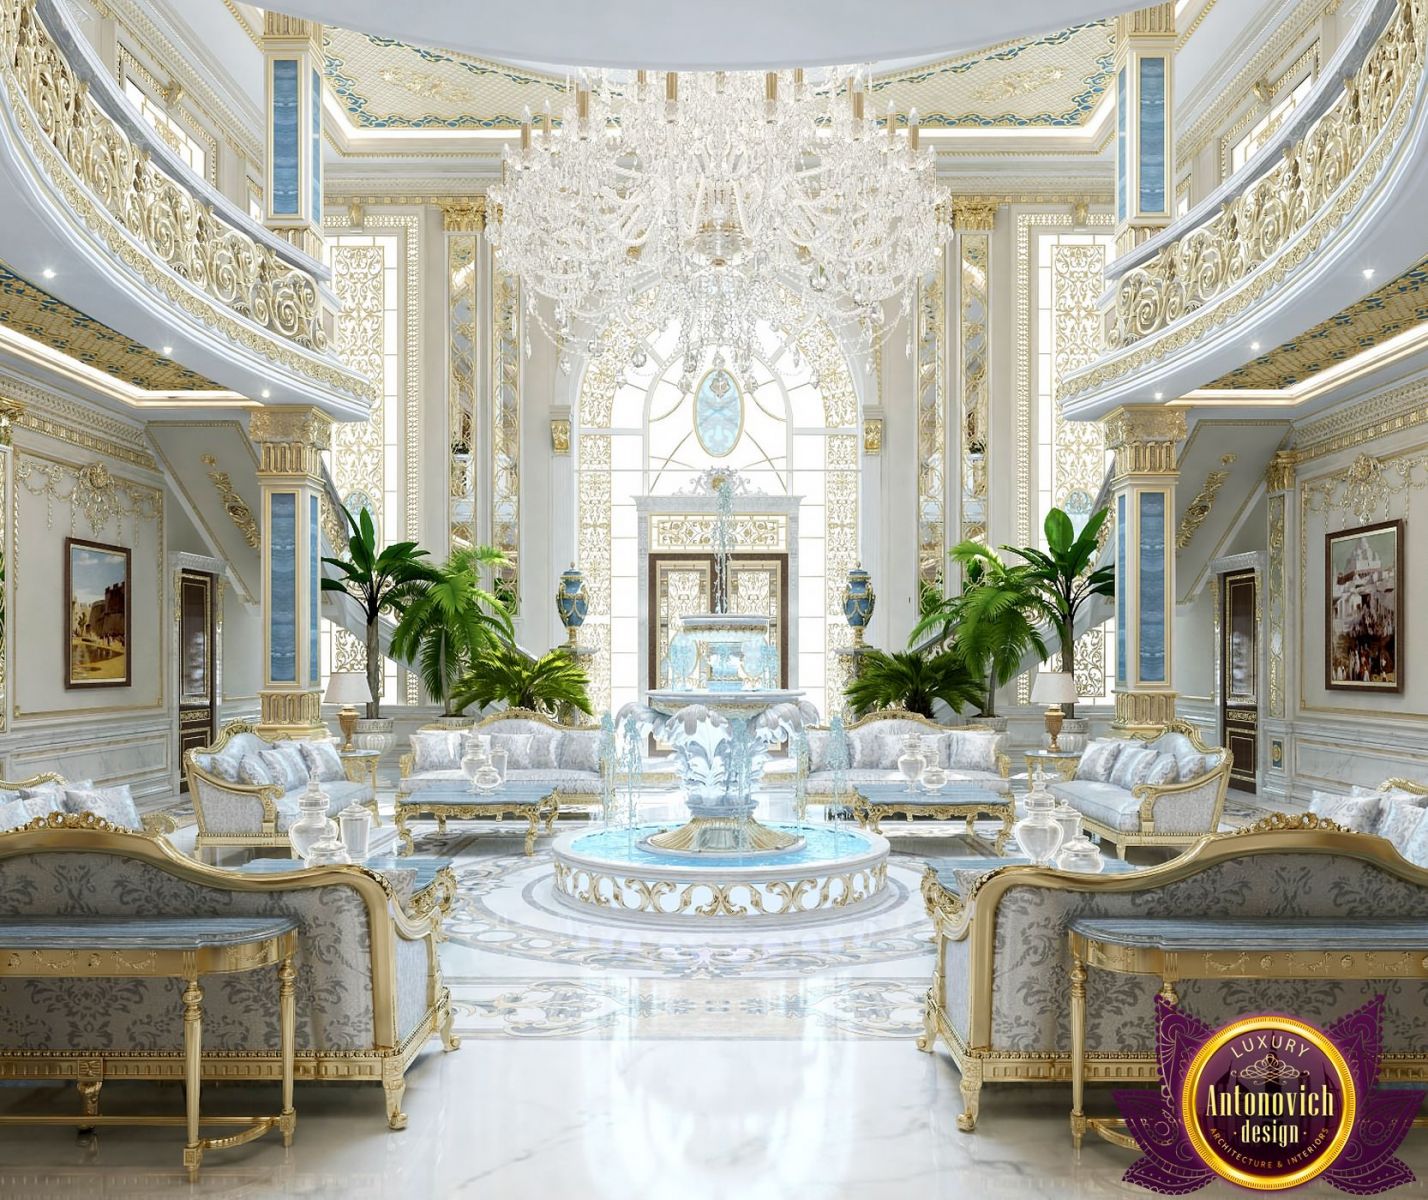 Exquisite bathroom with a touch of opulence